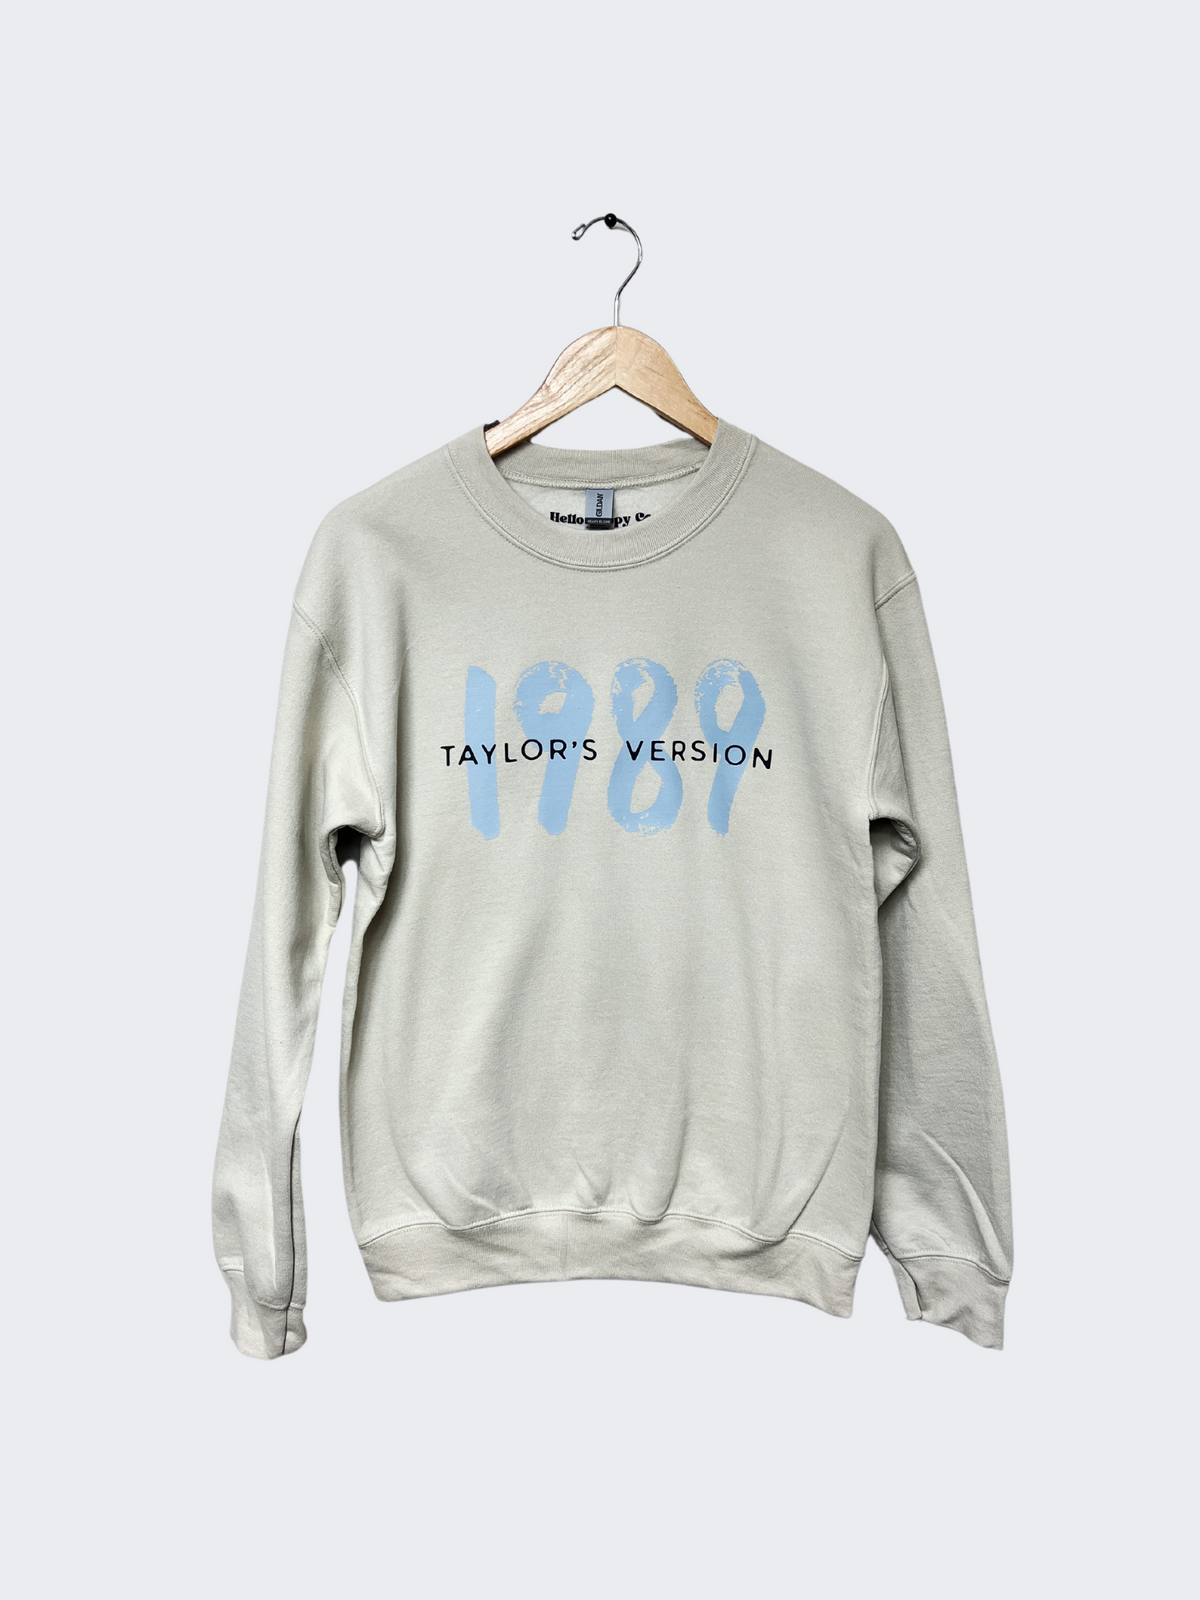 taylor swift 1989 taylor's version sweatshirt-front view